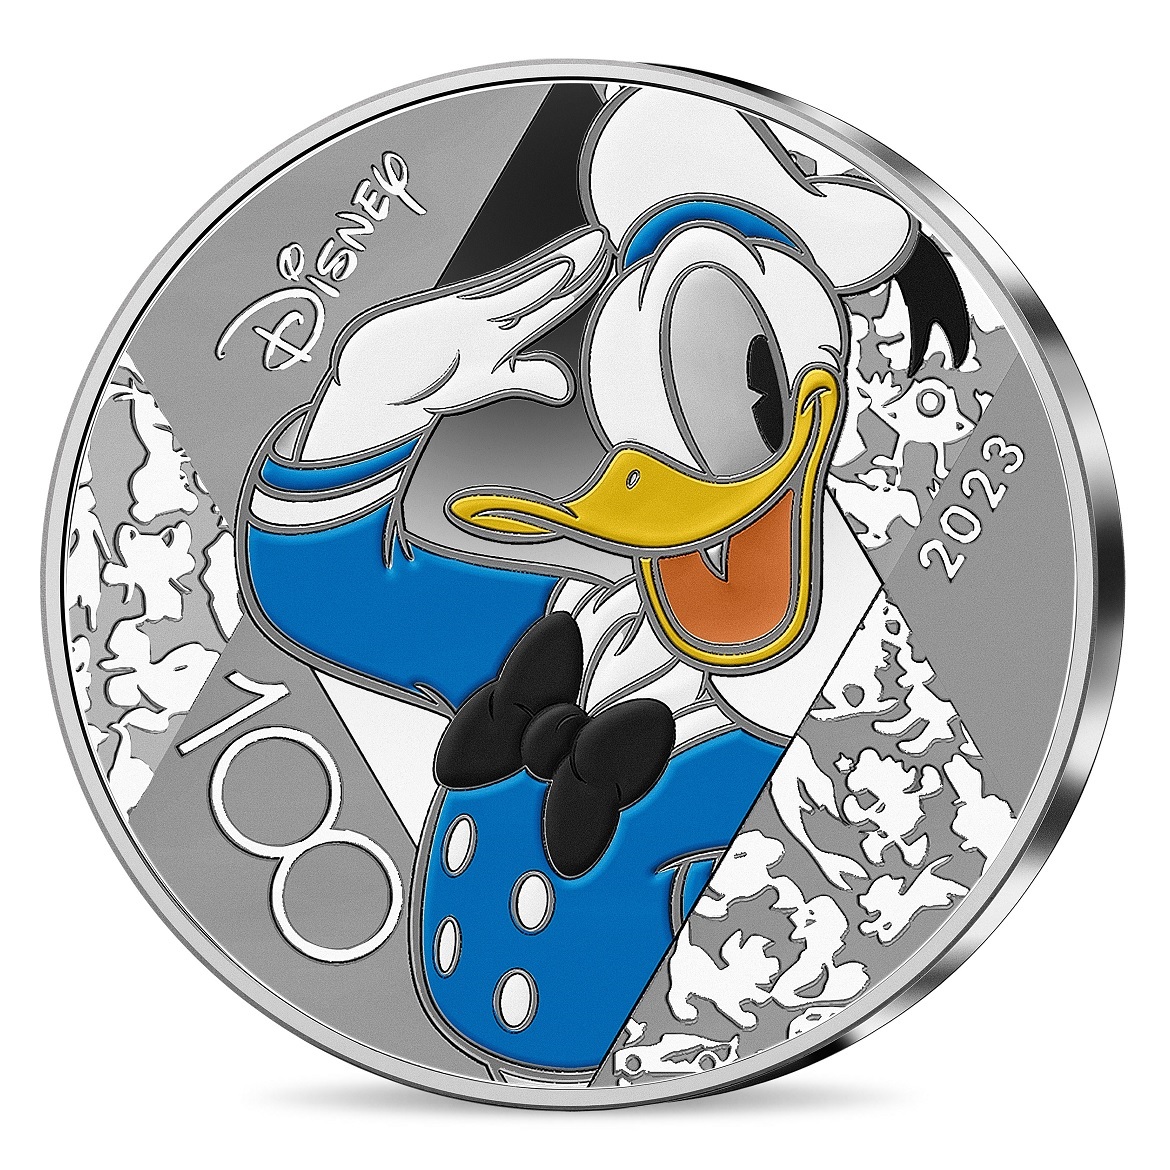 (EUR07.Proof.2023.10041378010000) 10 euro France 2023 Proof silver - Disney Studios 100 Years (Donald Duck) Obverse (zoom)